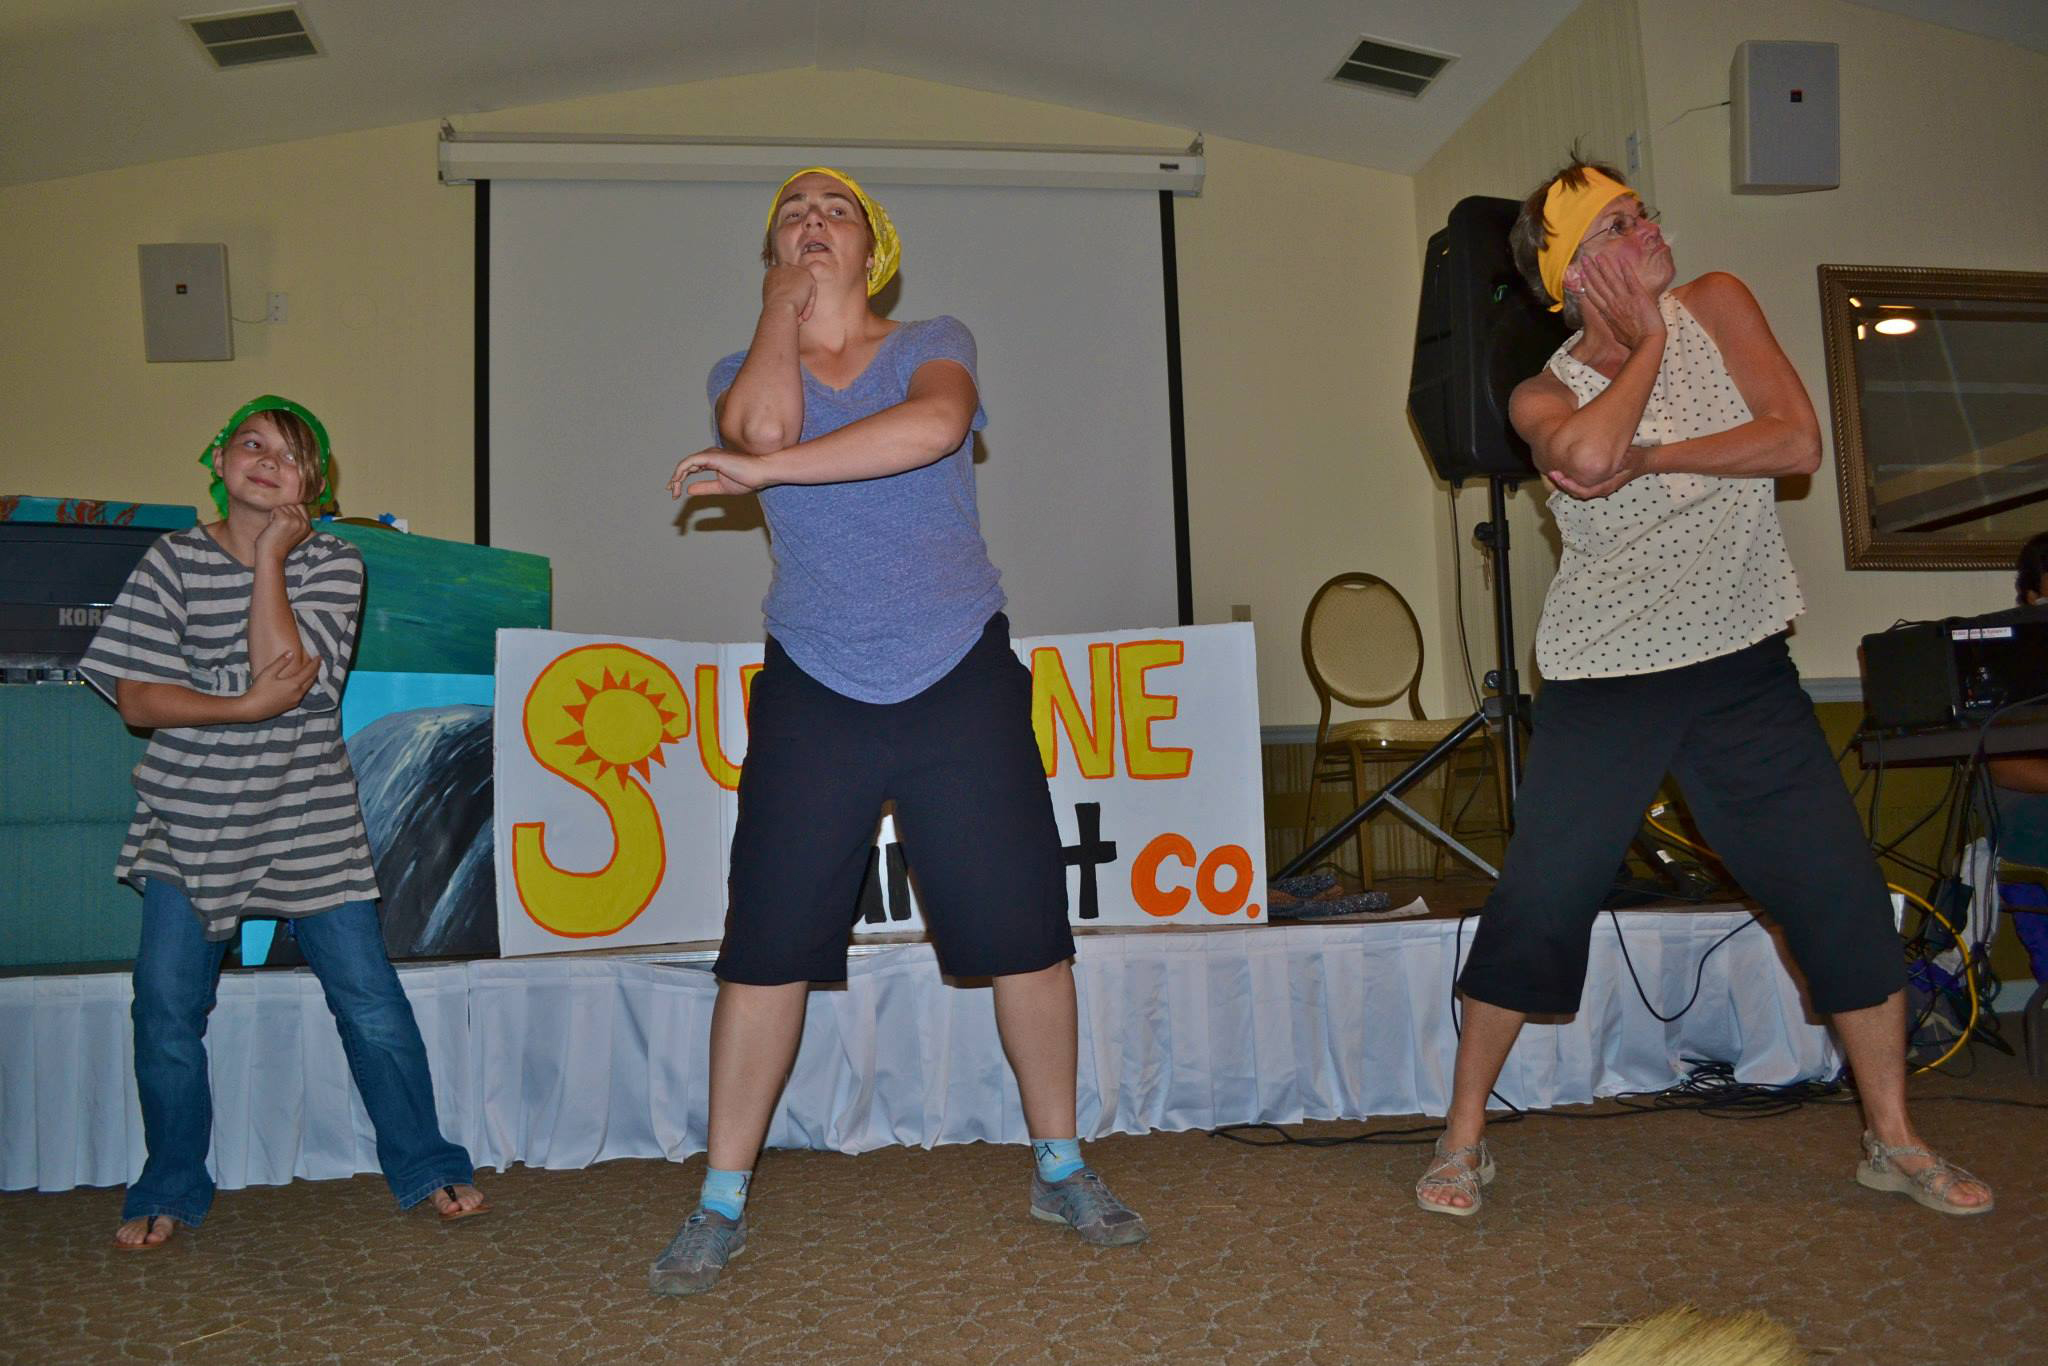 Three generations dance to "Walking on Sunshine" by Katrina and the Waves